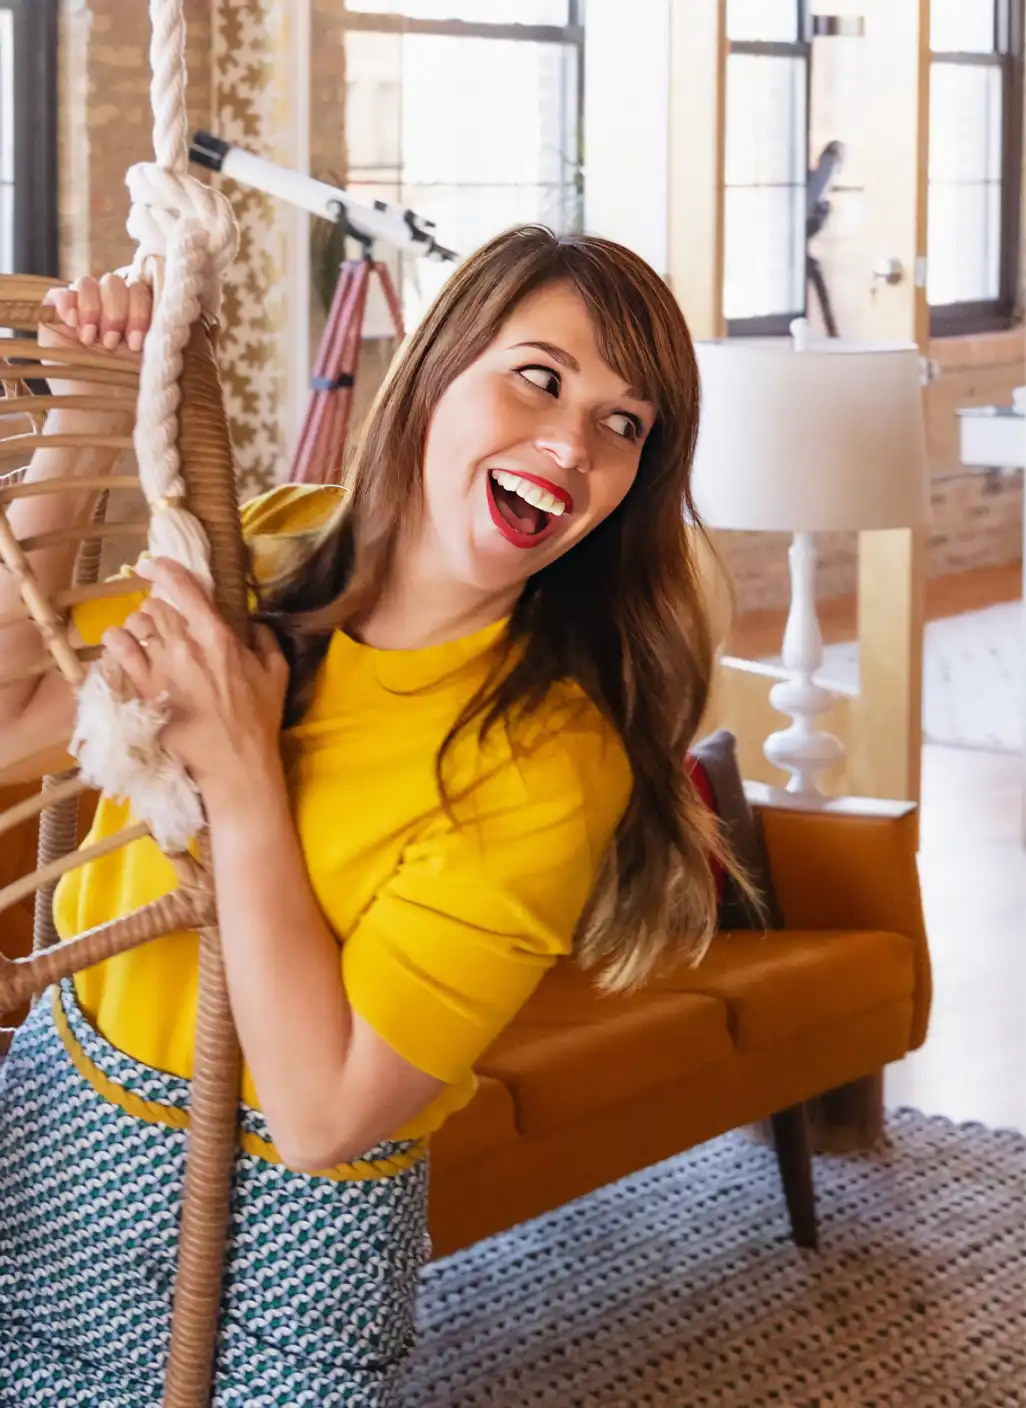 Founder of DesignScout, Scout Driscoll, swinging from a hanging egg chair in their studio.